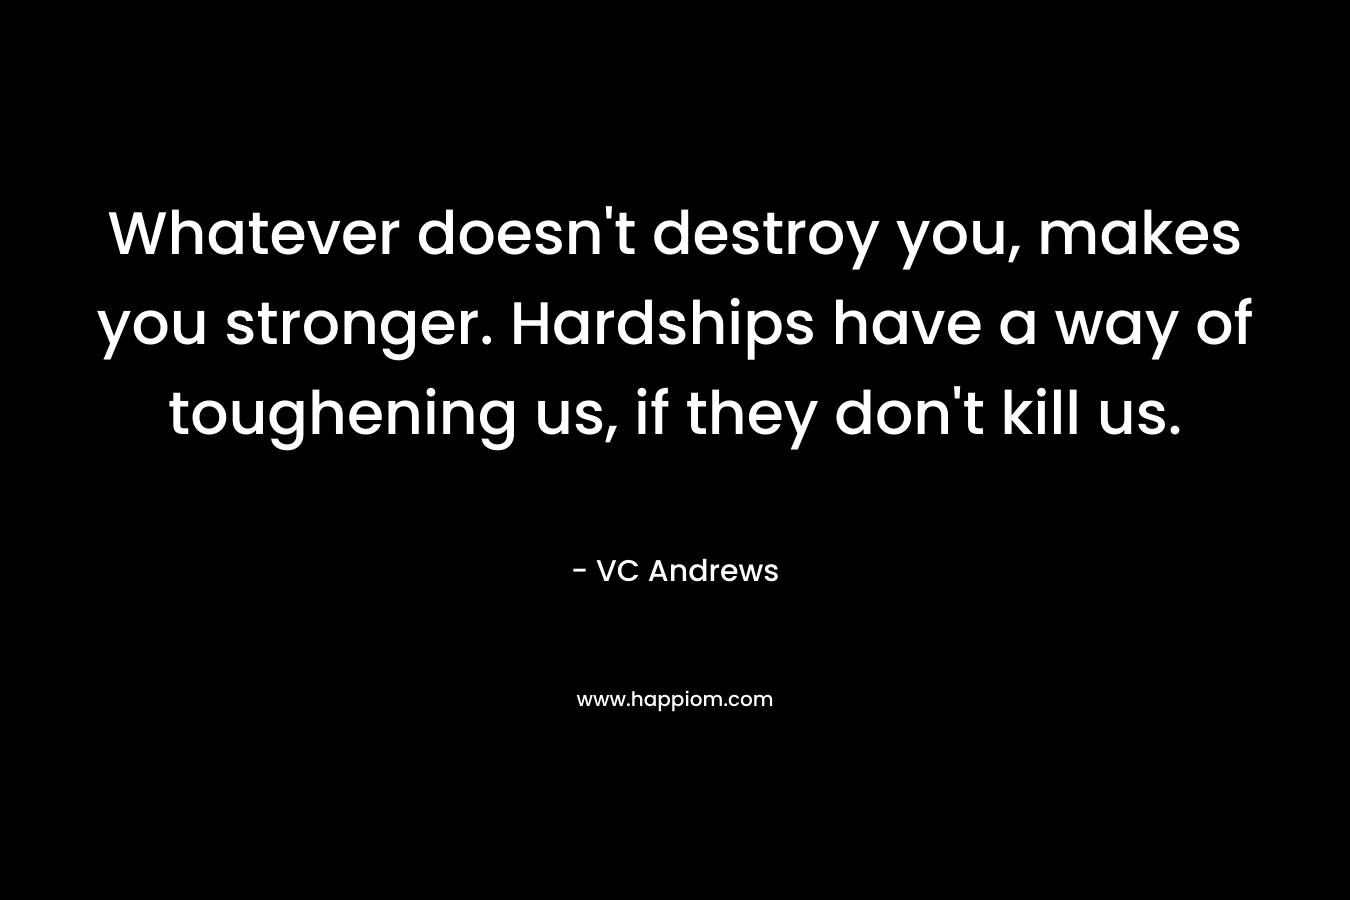 Whatever doesn’t destroy you, makes you stronger. Hardships have a way of toughening us, if they don’t kill us. – VC Andrews